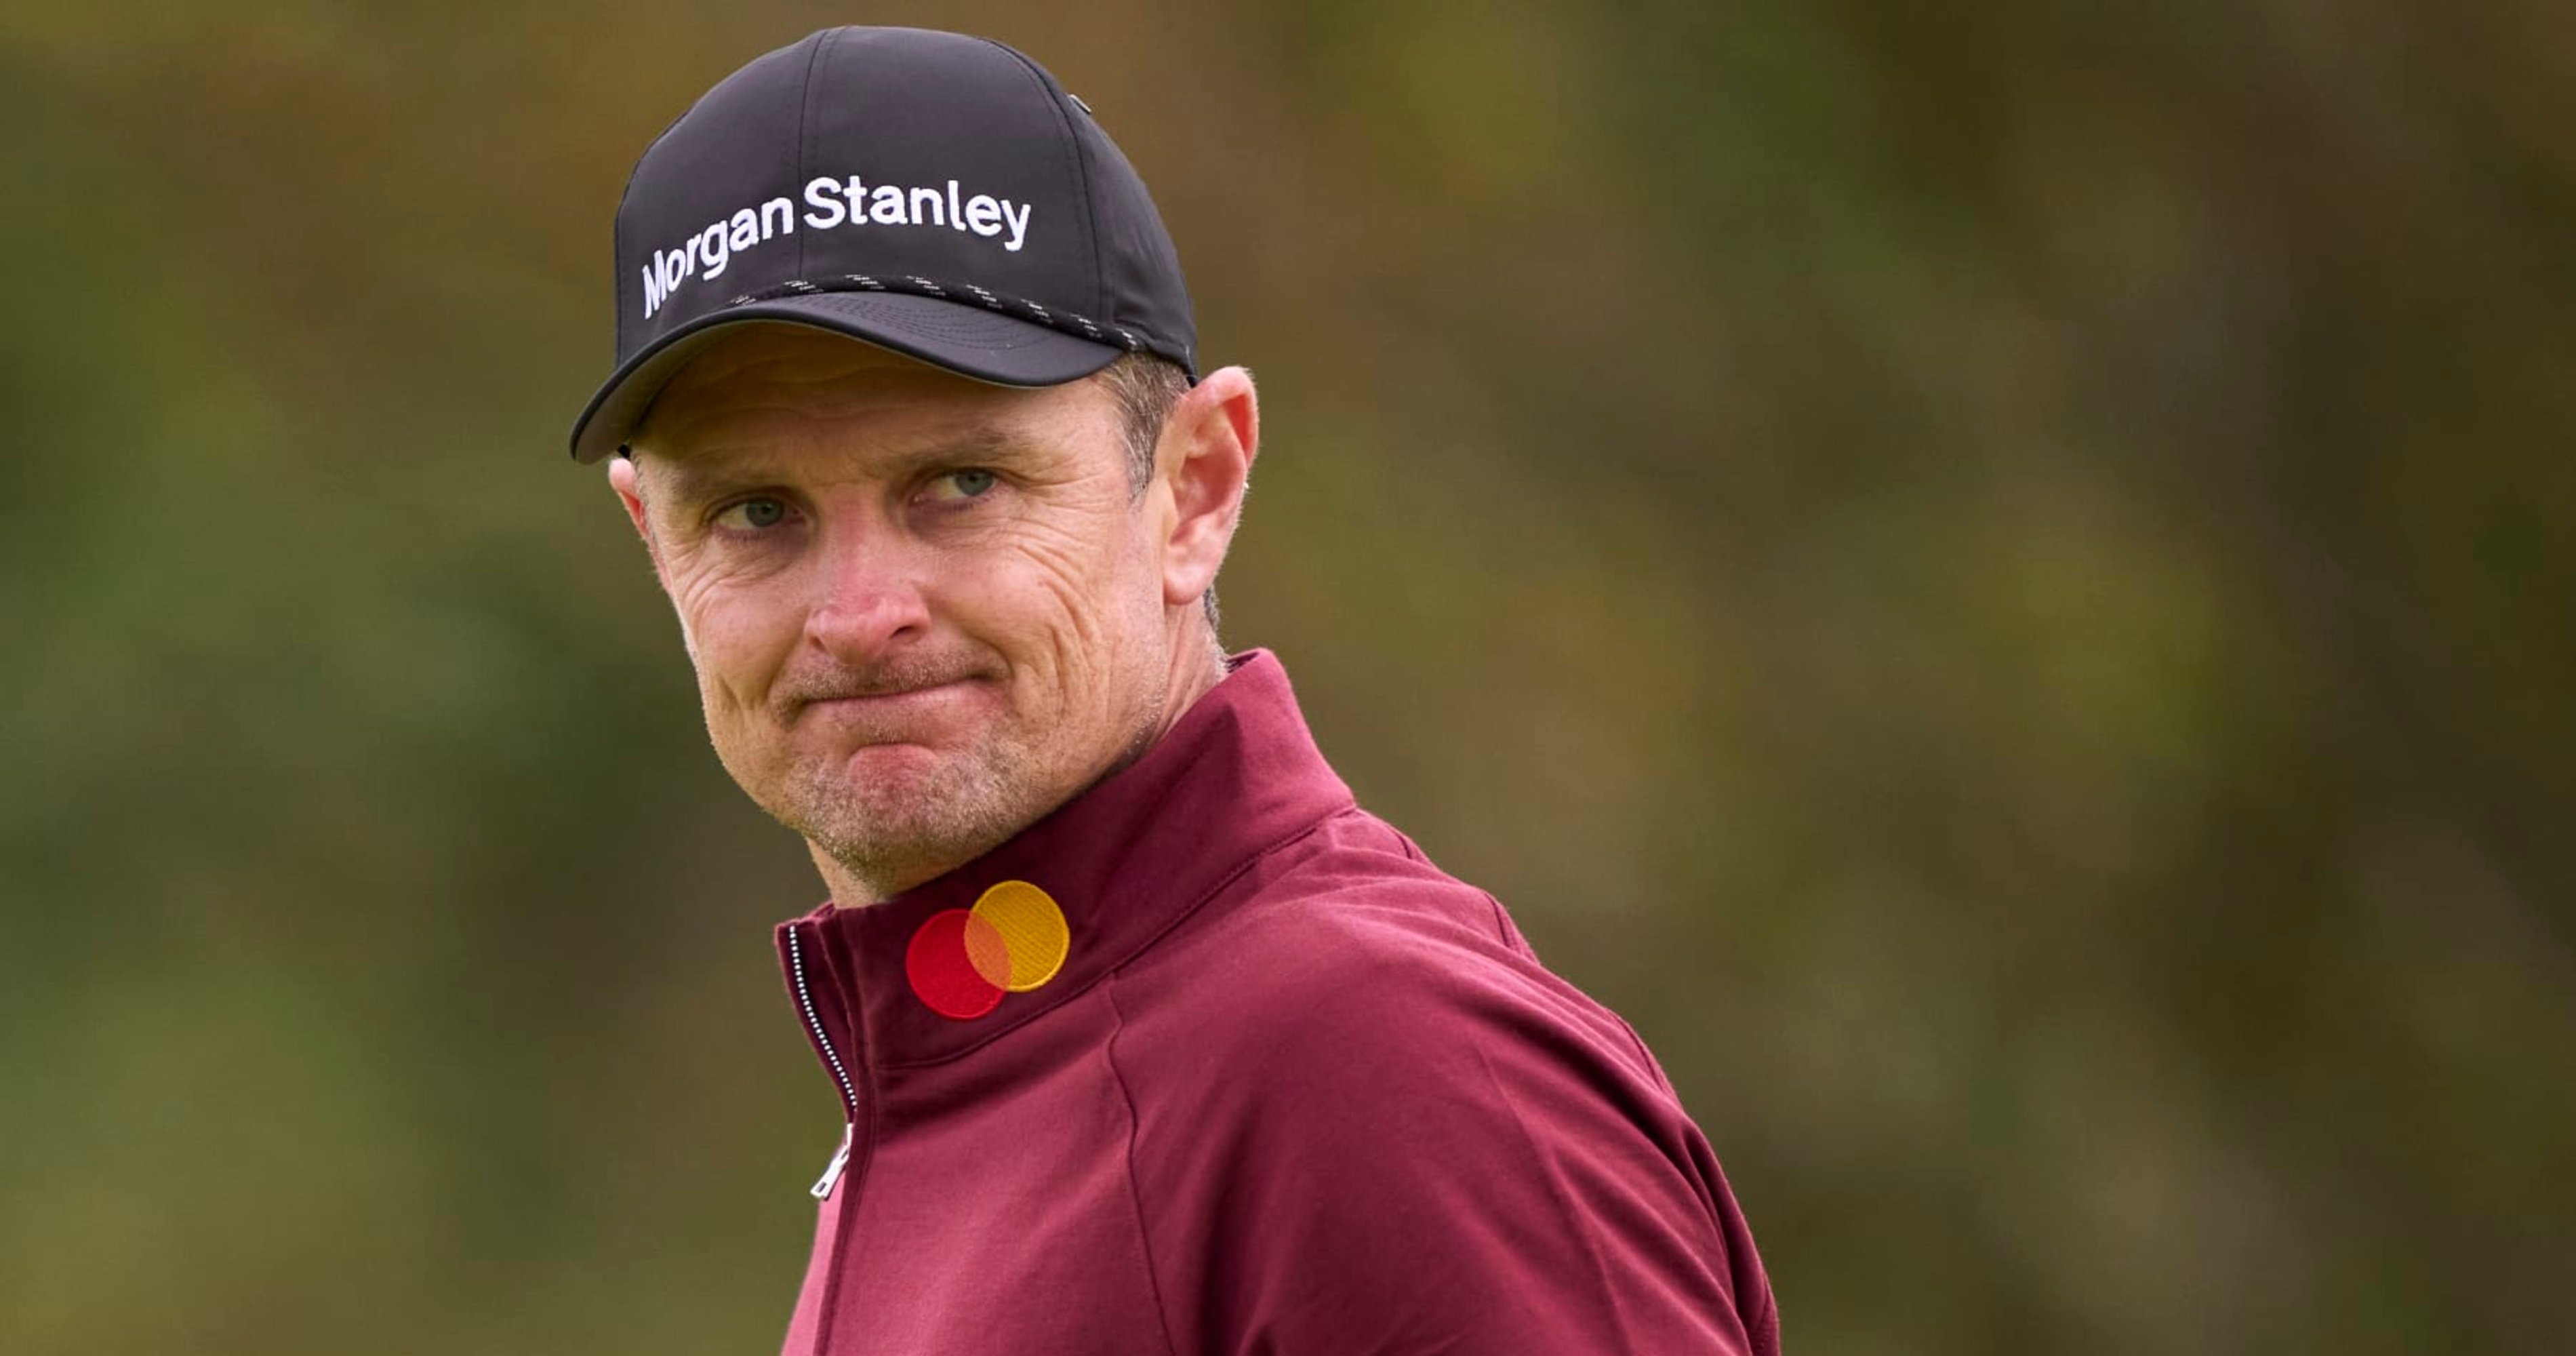 Justin Rose Describes 'Tough' British Open After Finishing 2nd to Xander Schauffele